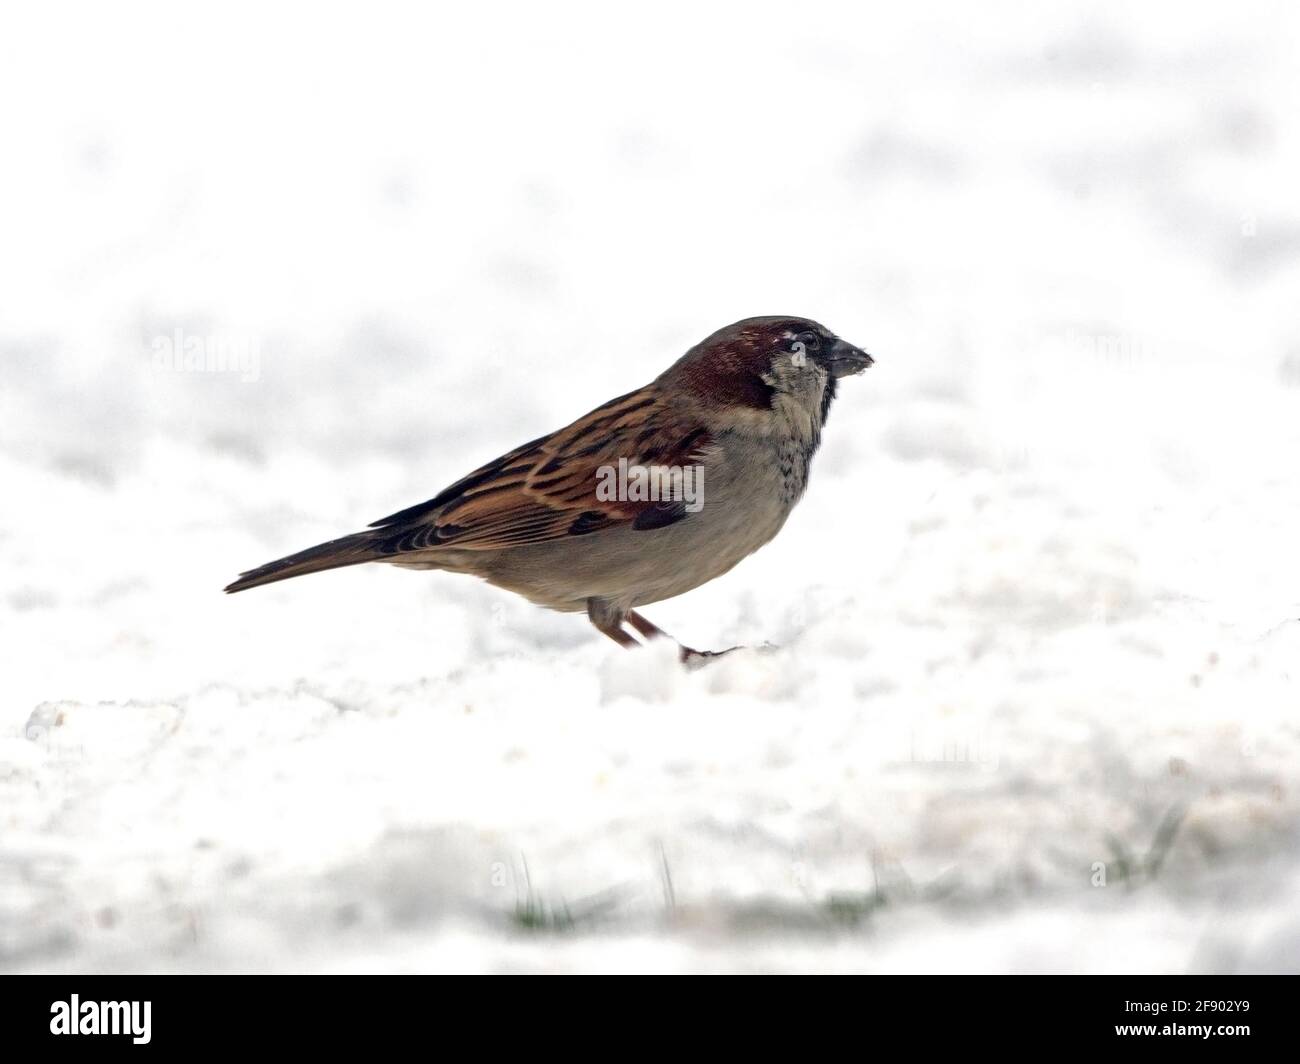 Male house sparrow standing in snow Stock Photo